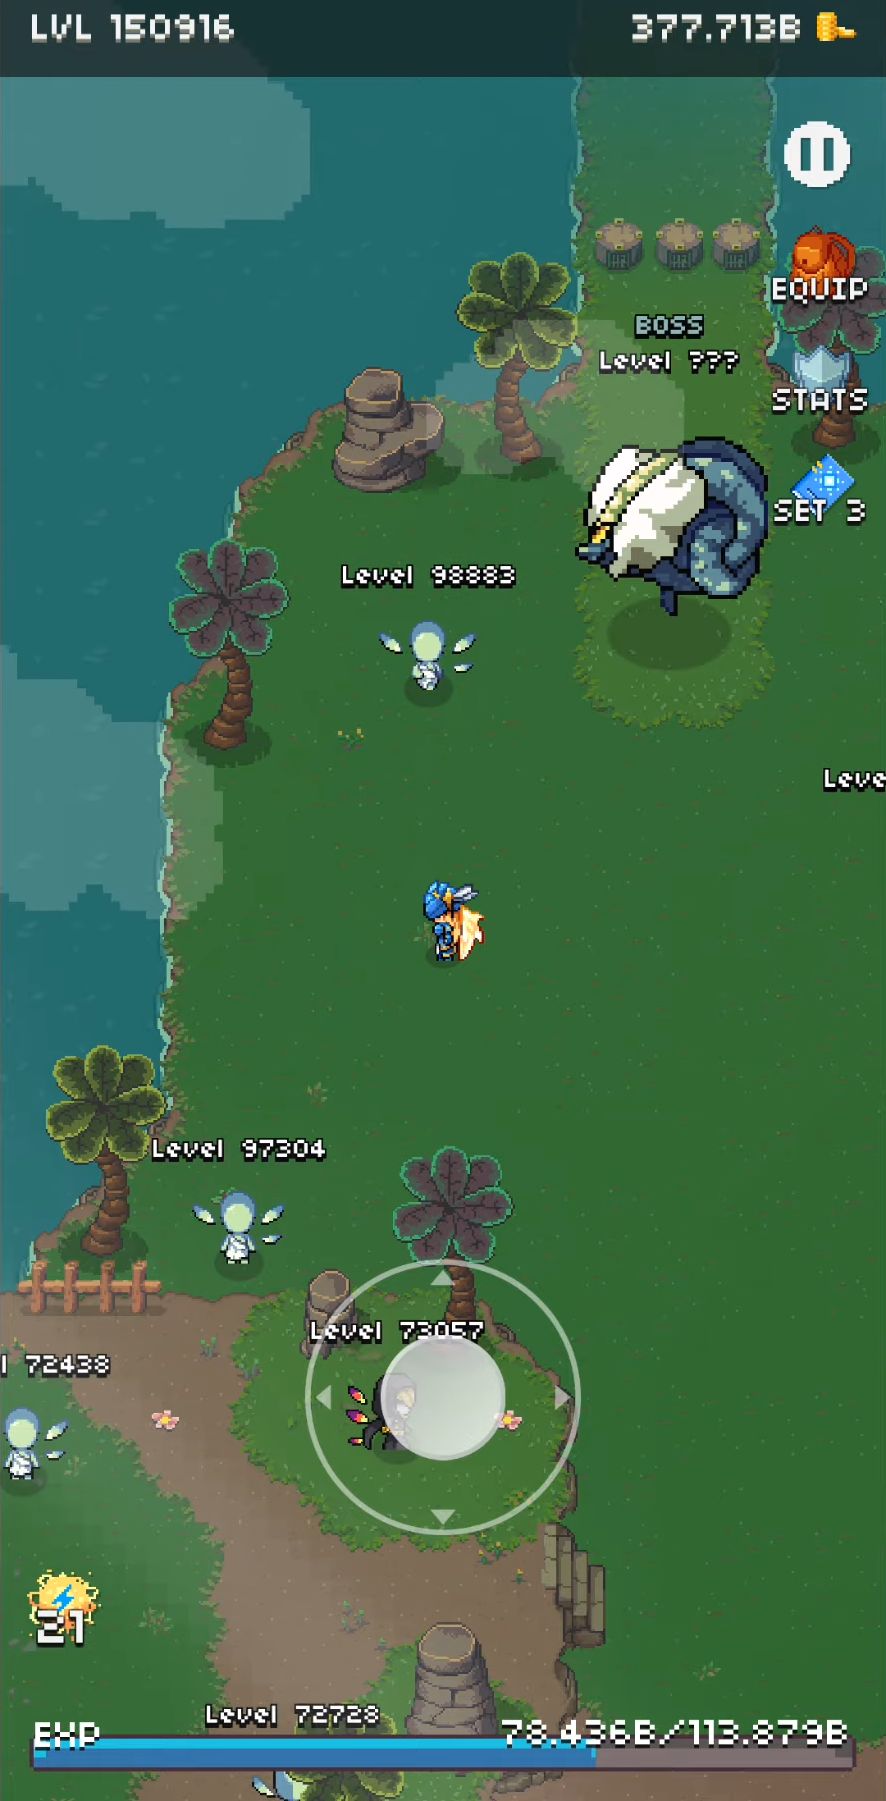 Gameplay of the Hero's Quest: Automatic Roguelite RPG for Android phone or tablet.